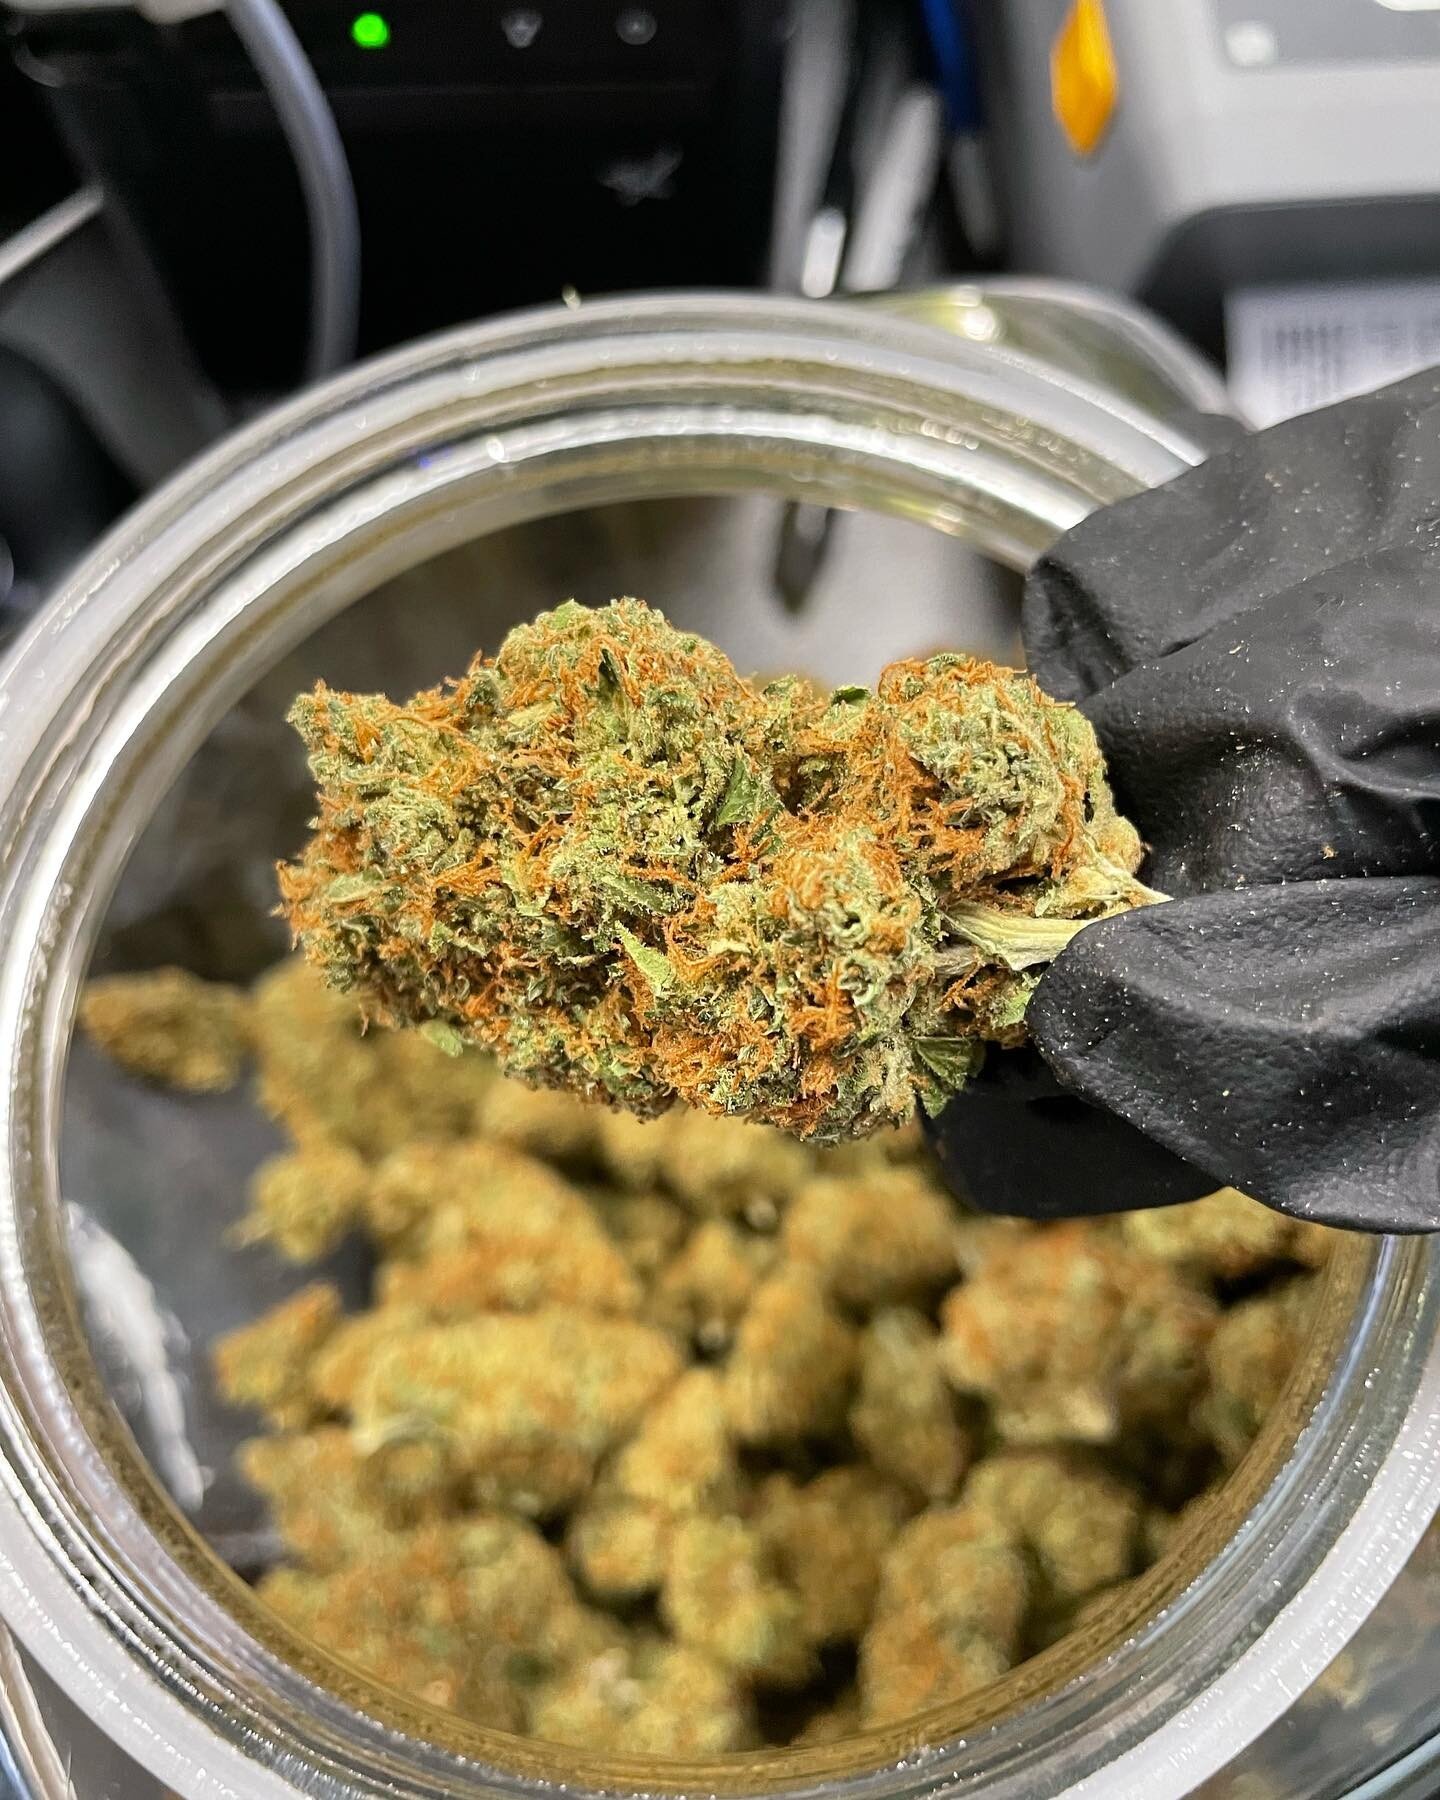 Our Lime Haze Sativa strain is glowing ✨ and our rice Krispy treats are 🔥 Stop on in and check out all the wonderful bud, edibles, and our awesome prices.